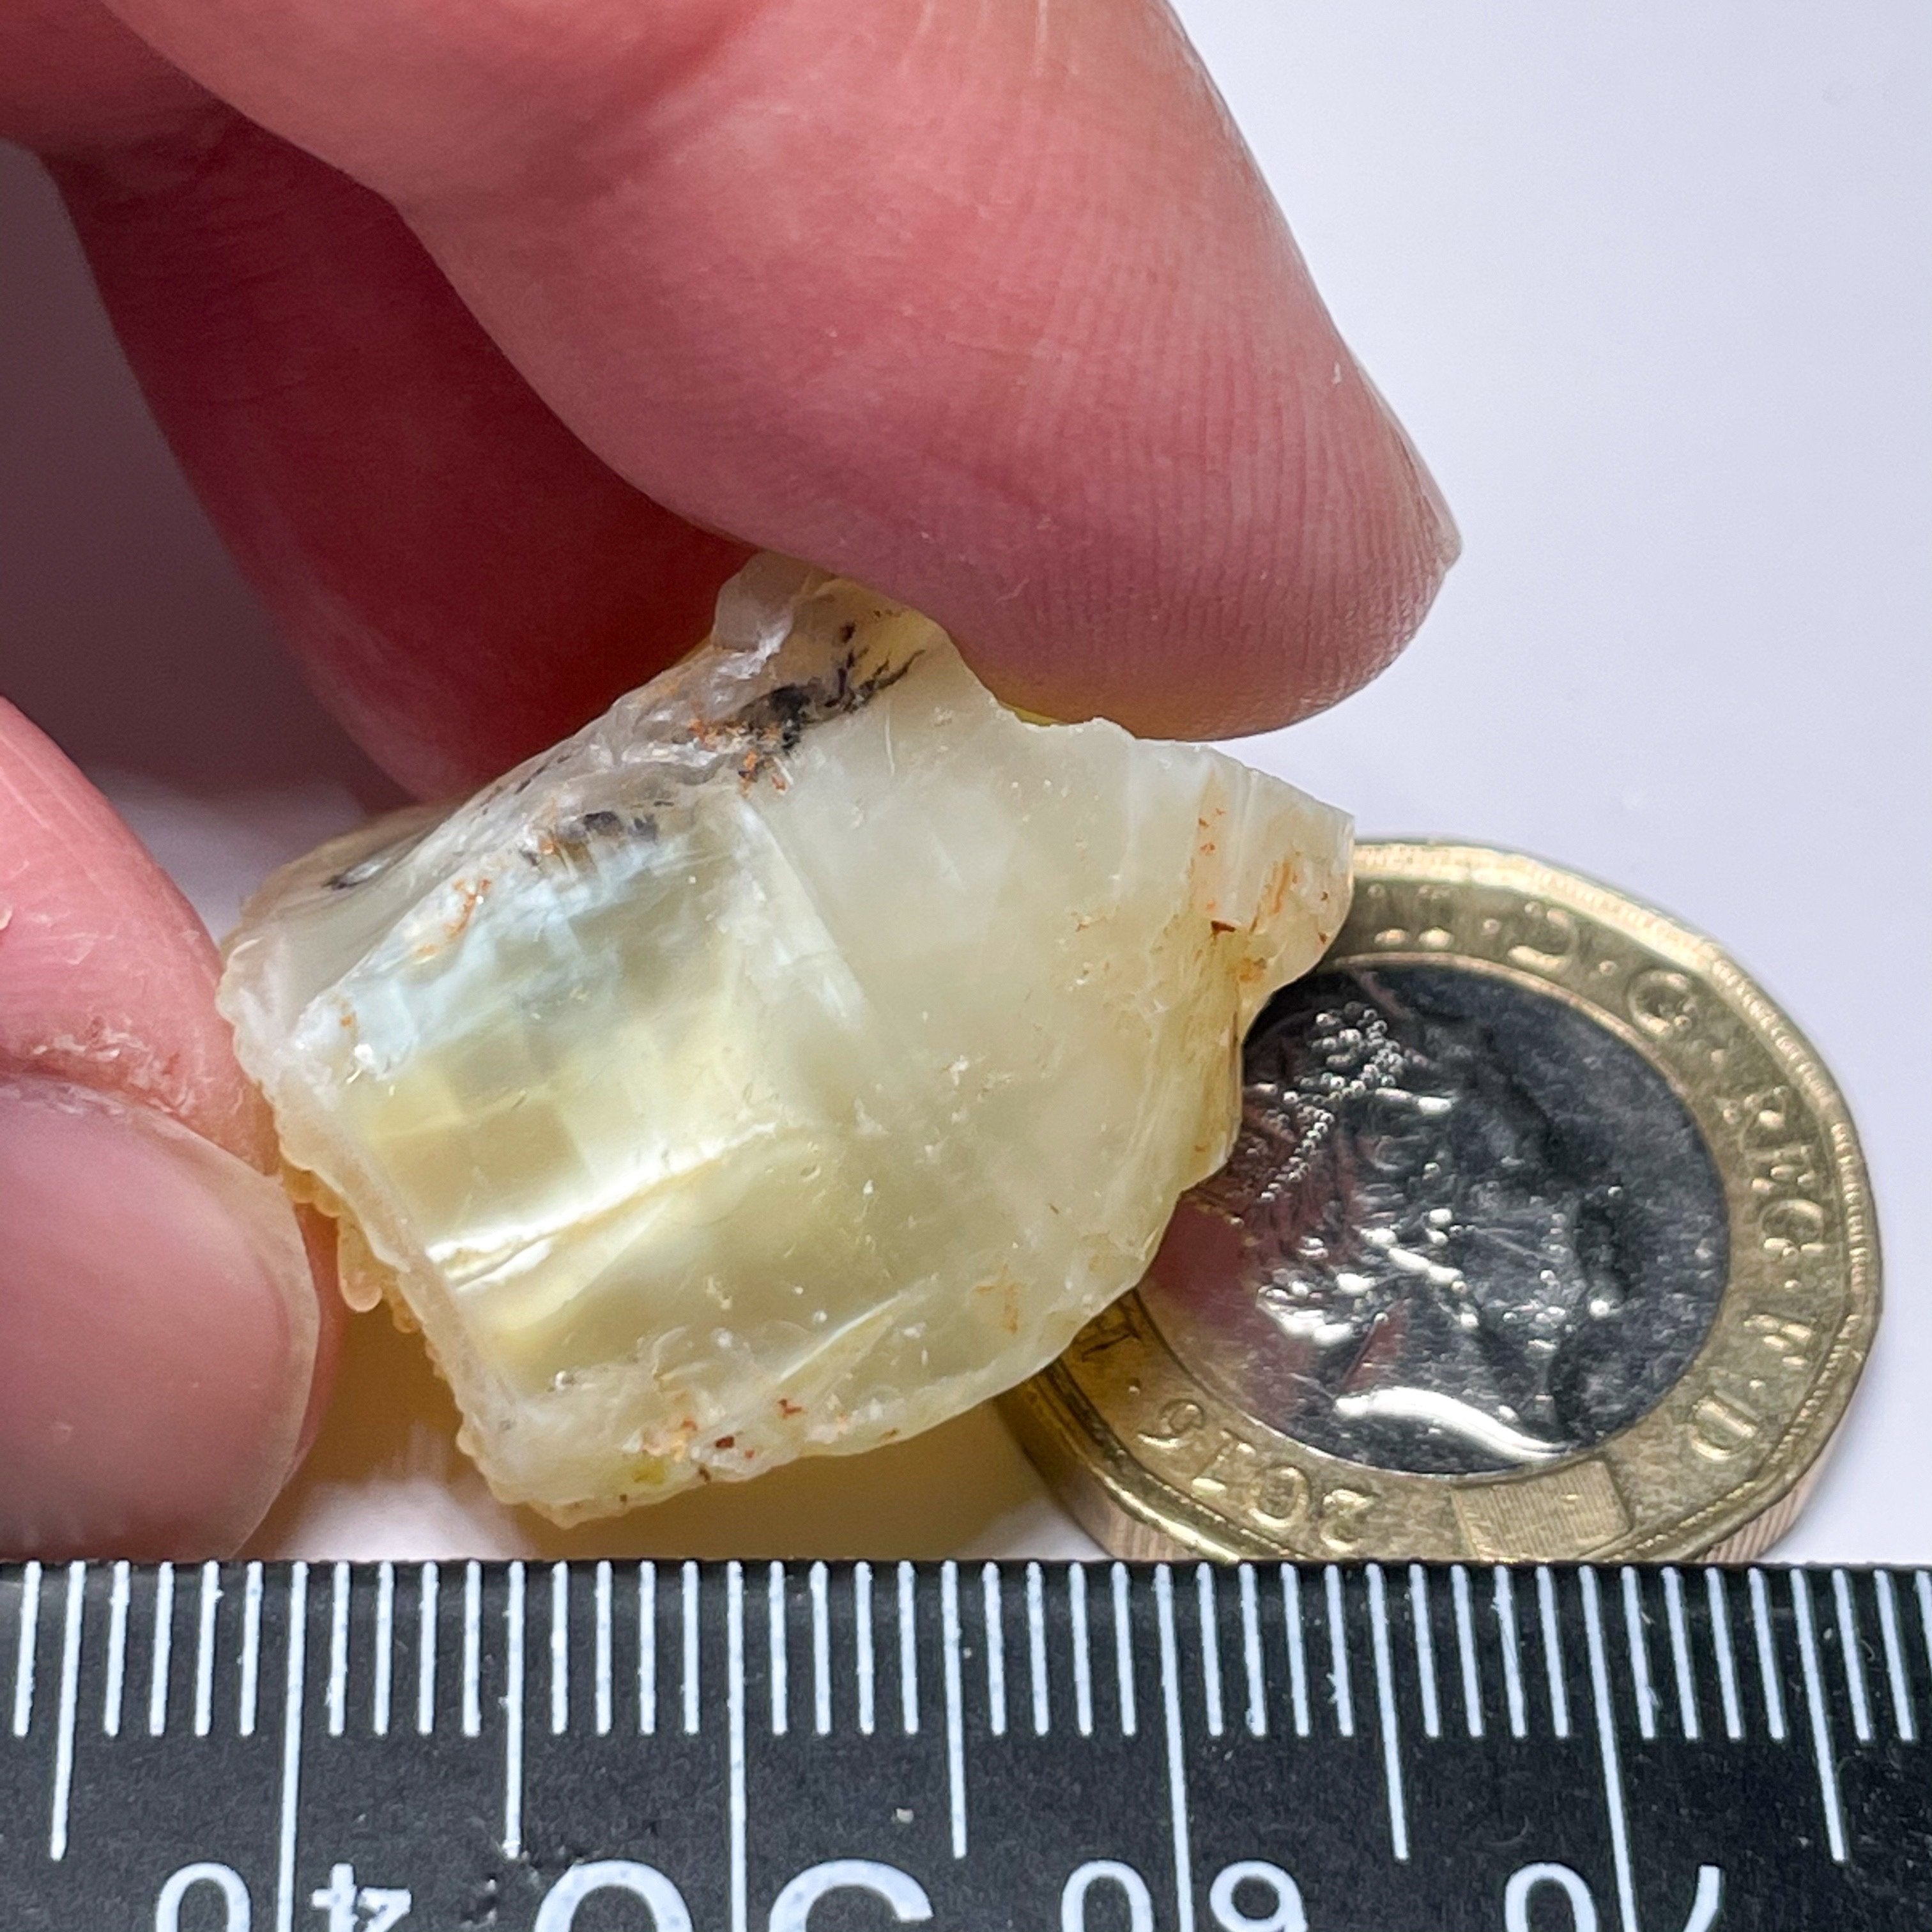 38.47Ct Opal Tanzania Untreated Unheated From A 1999 Deposit Chatoyant (White Pearly Cats-Eye